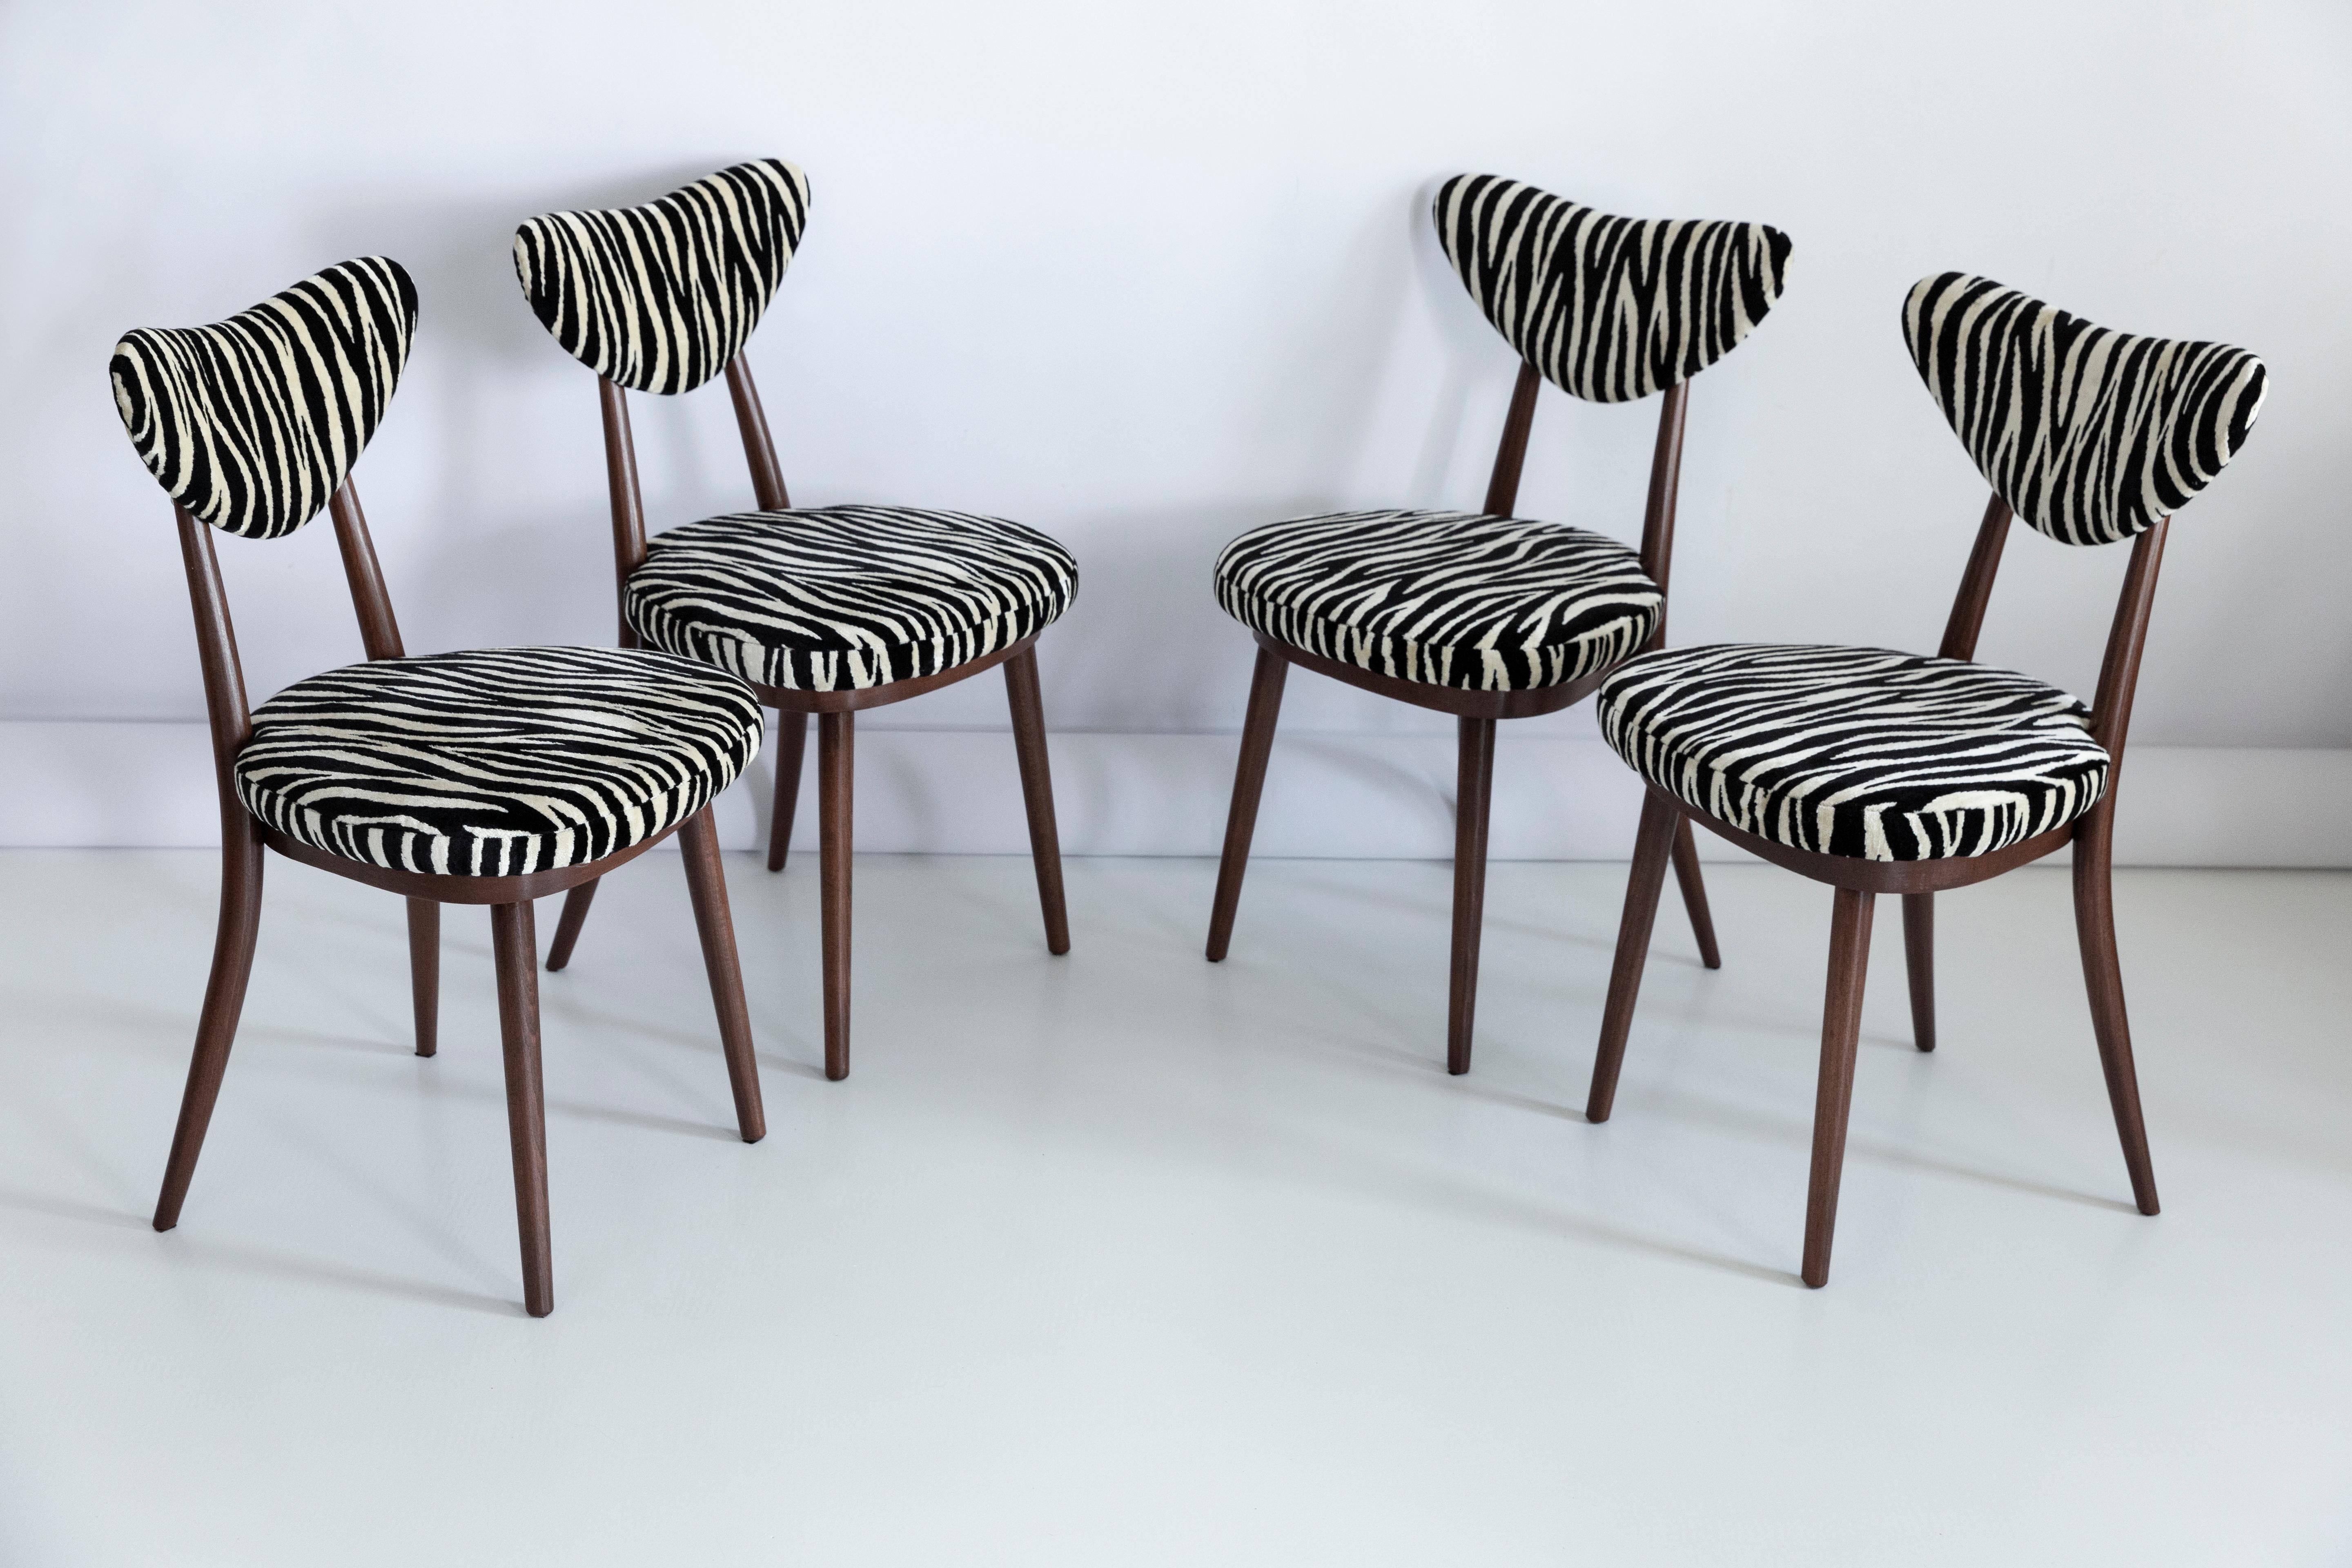 Hand-Crafted Set of Six Midcentury Zebra Black and White Heart Chairs, Poland, 1960s For Sale